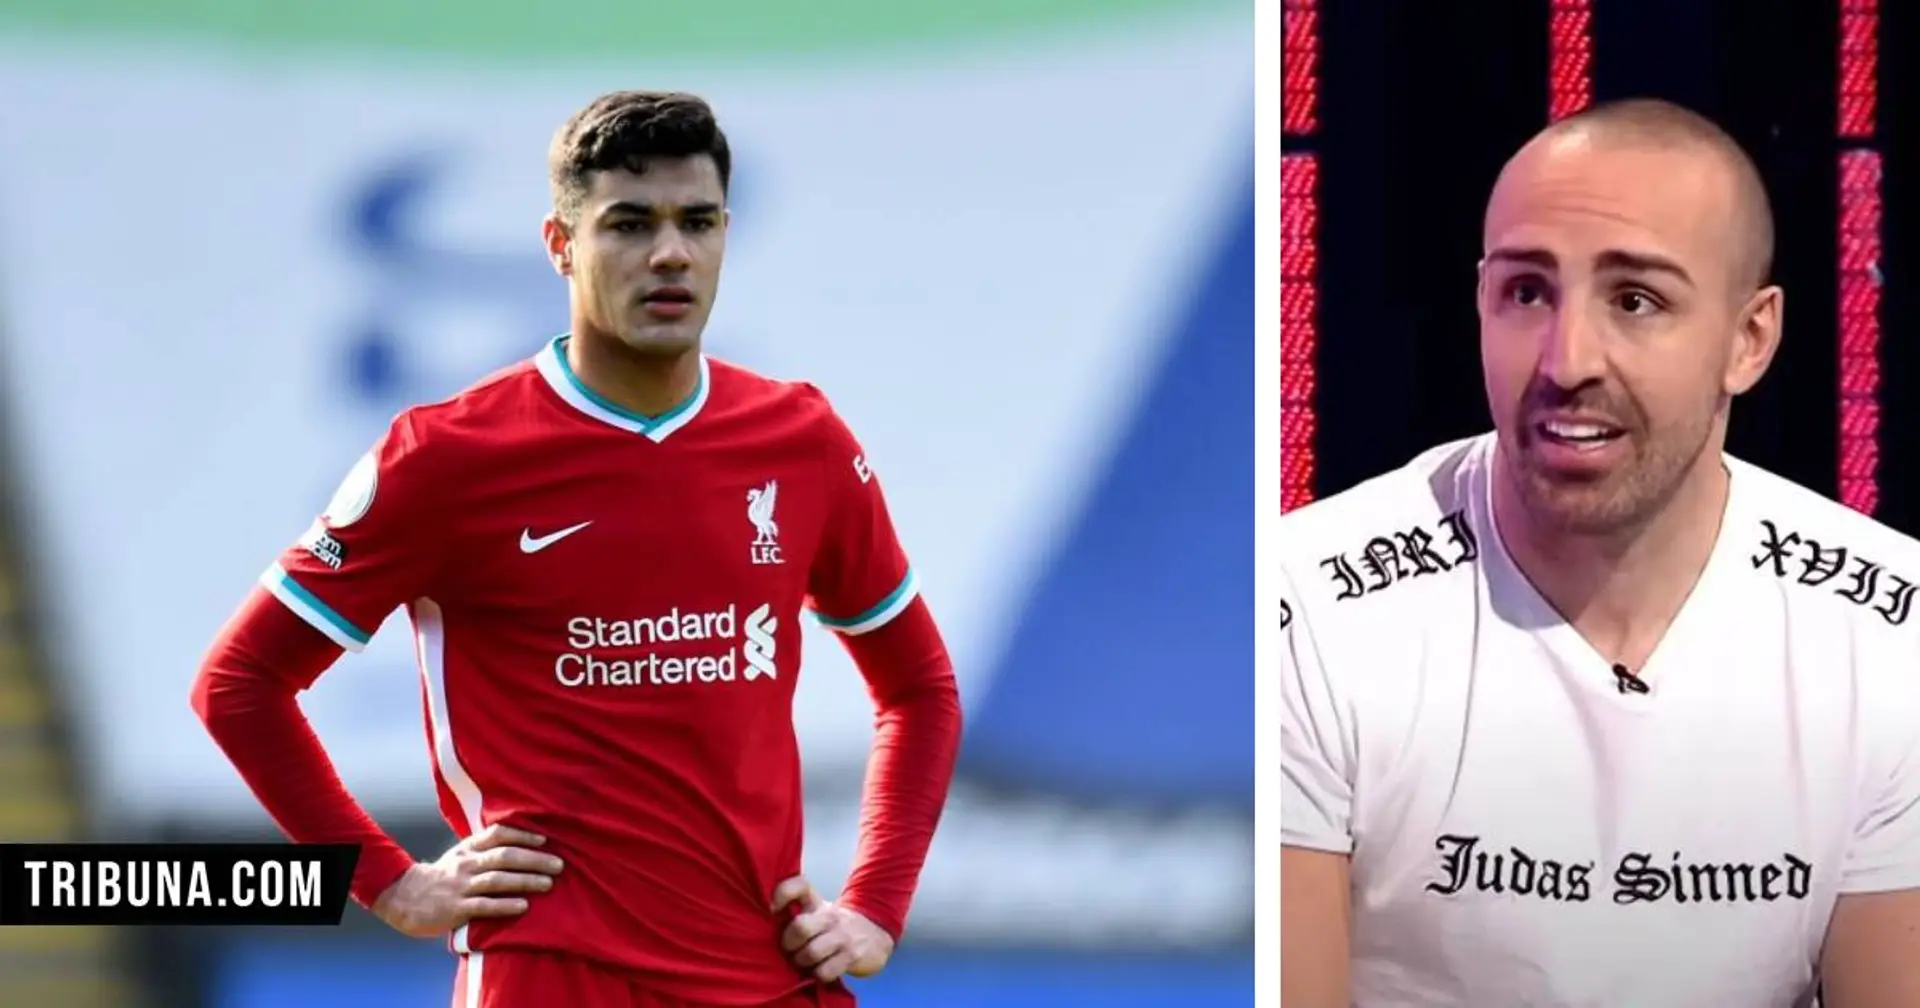 'It was the right choice': Jose Enrique gives 2 main reasons for Liverpool refusing to sign Kabak